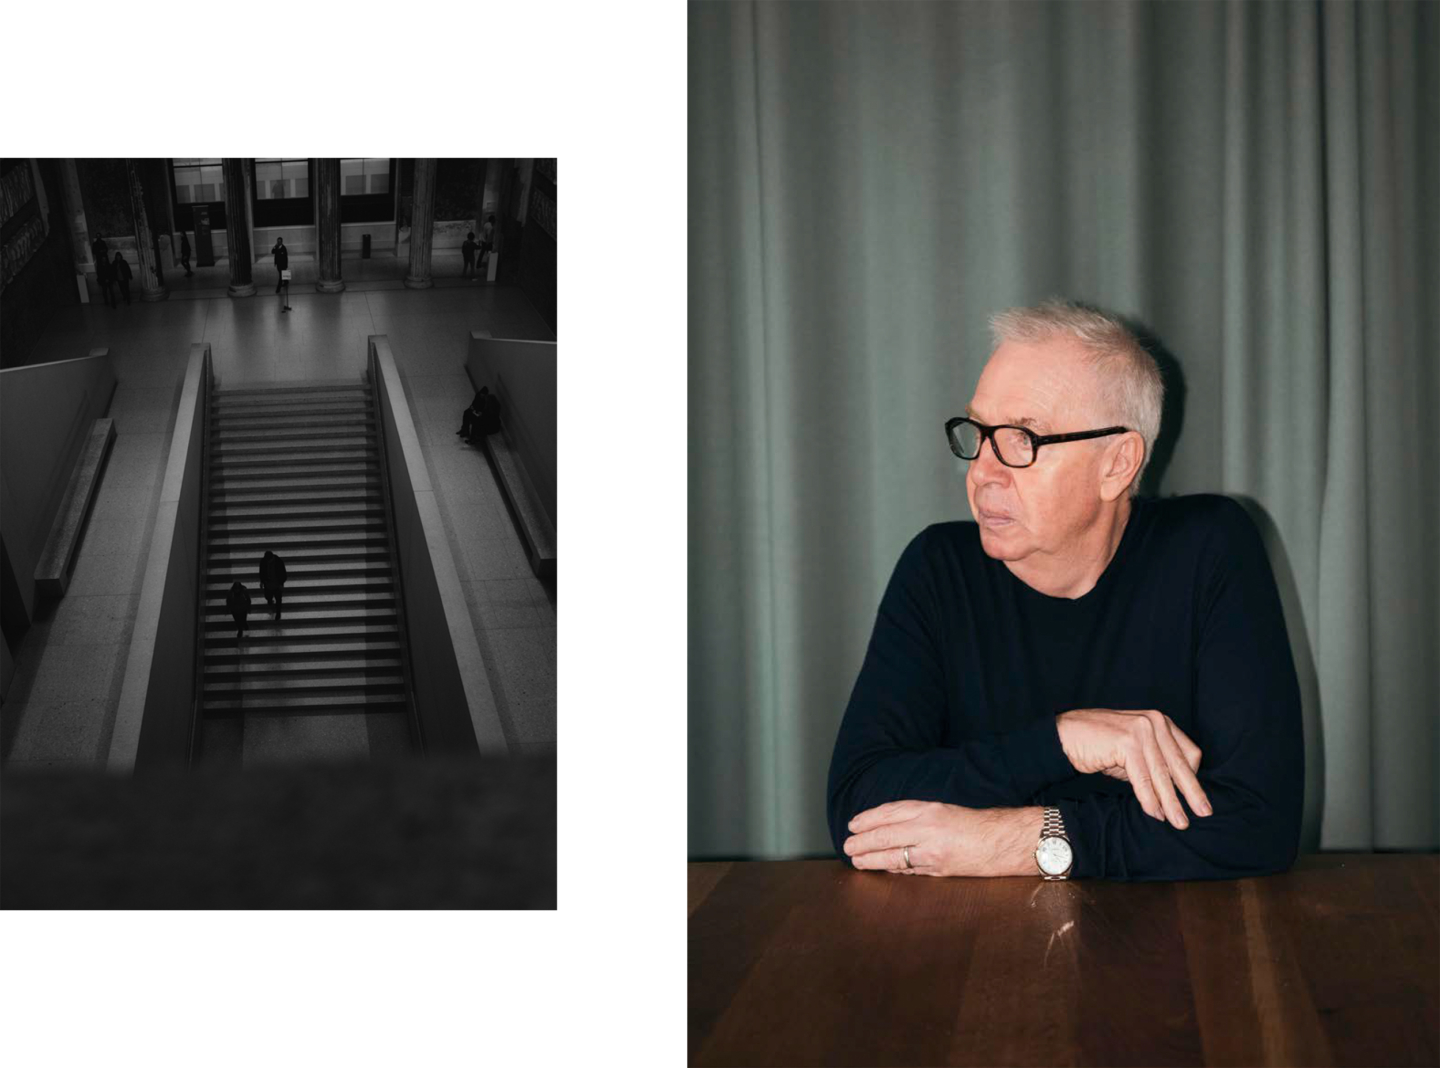 David Chipperfield for Nomad Magazine